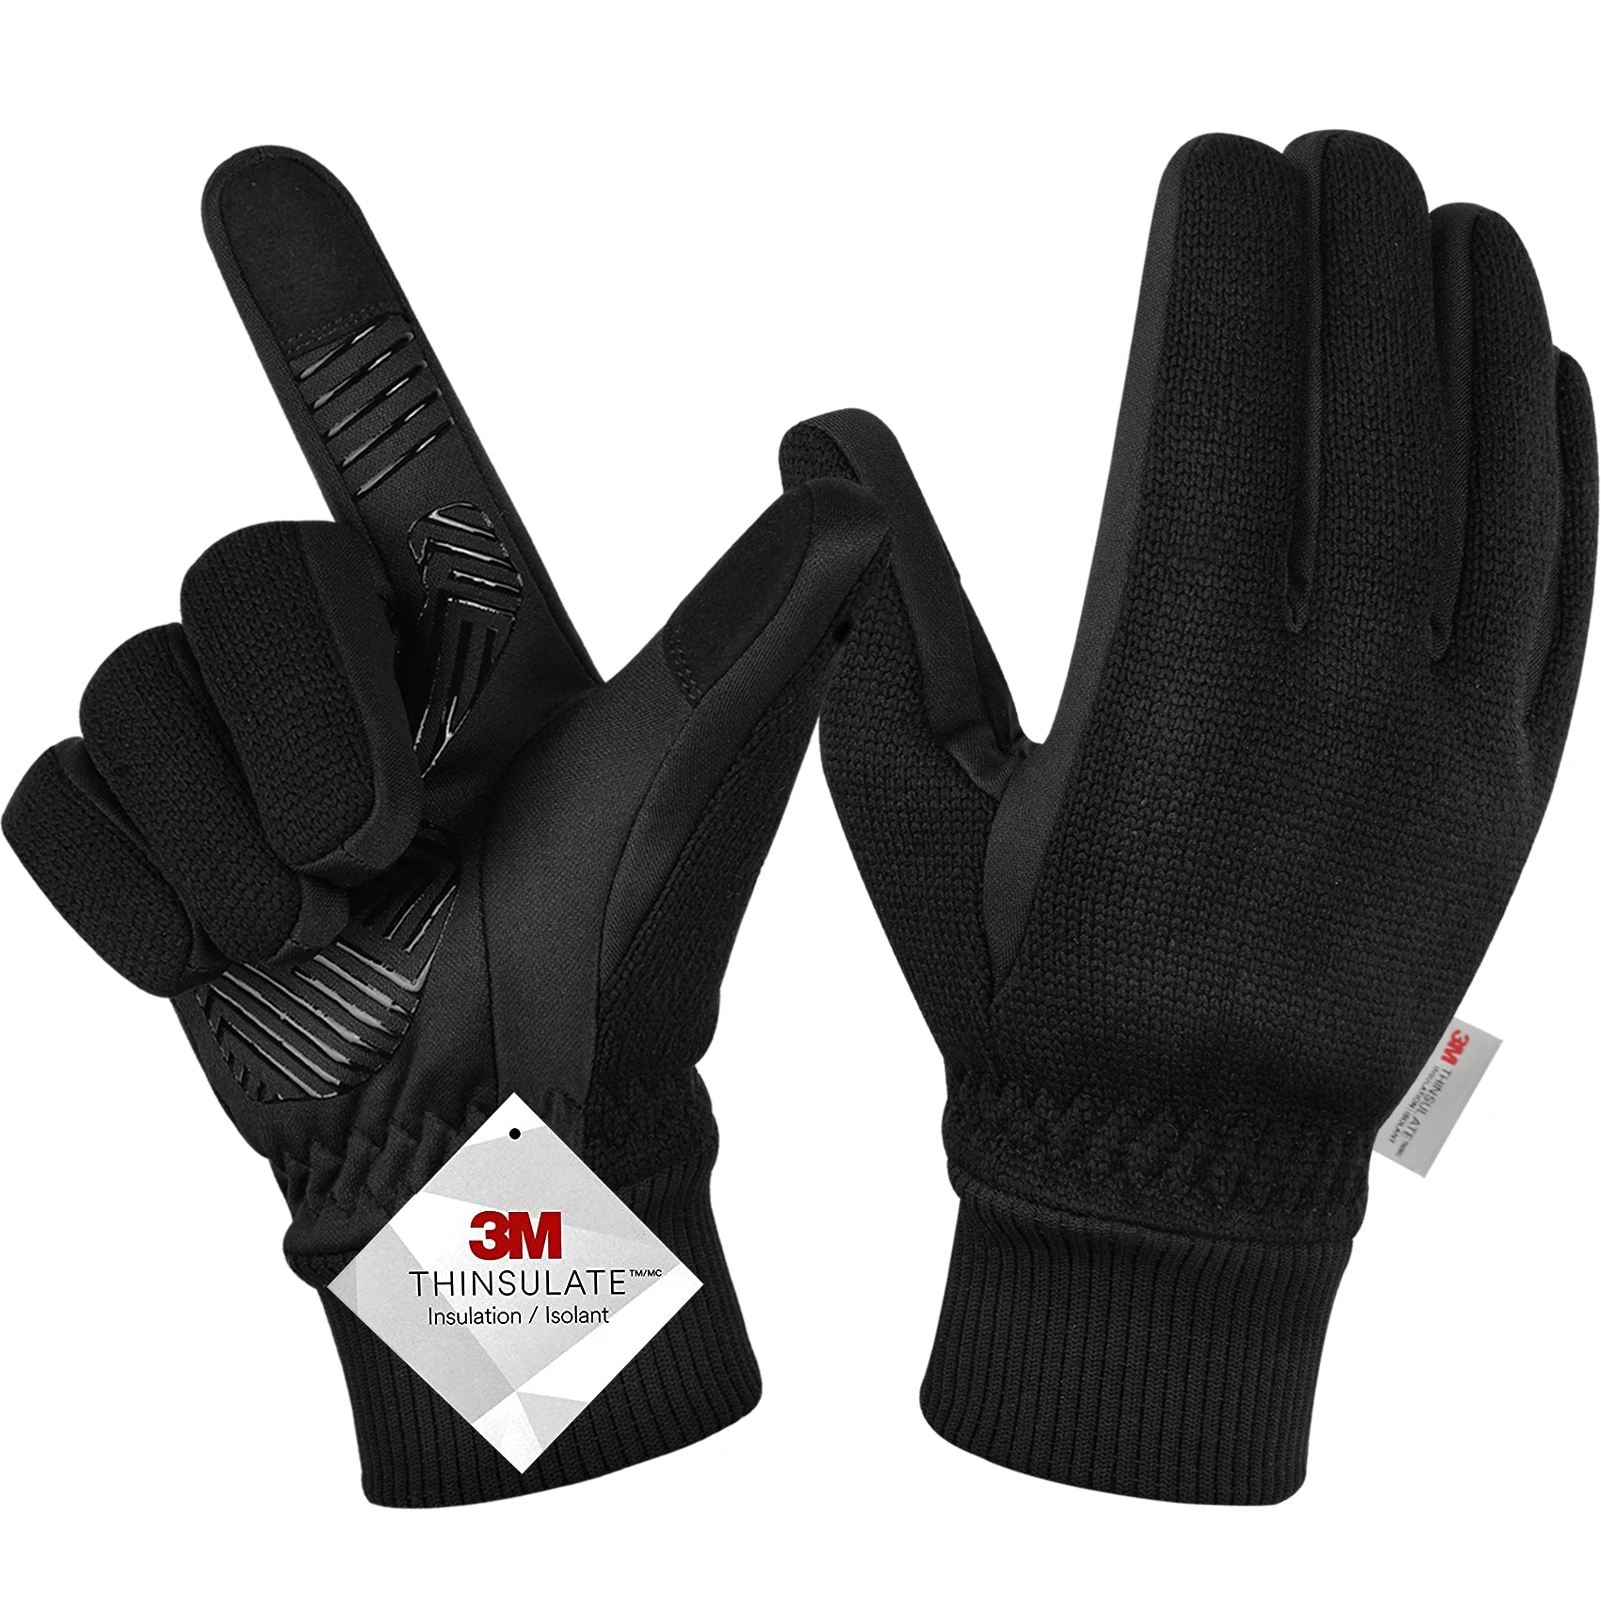 MOREOK -10℃ Winter Gloves 3M Thinsulate Thermal Gloves Touchscreen Bike Gloves Warm Bicycle Gloves Non-slip Cycling Gloves Men